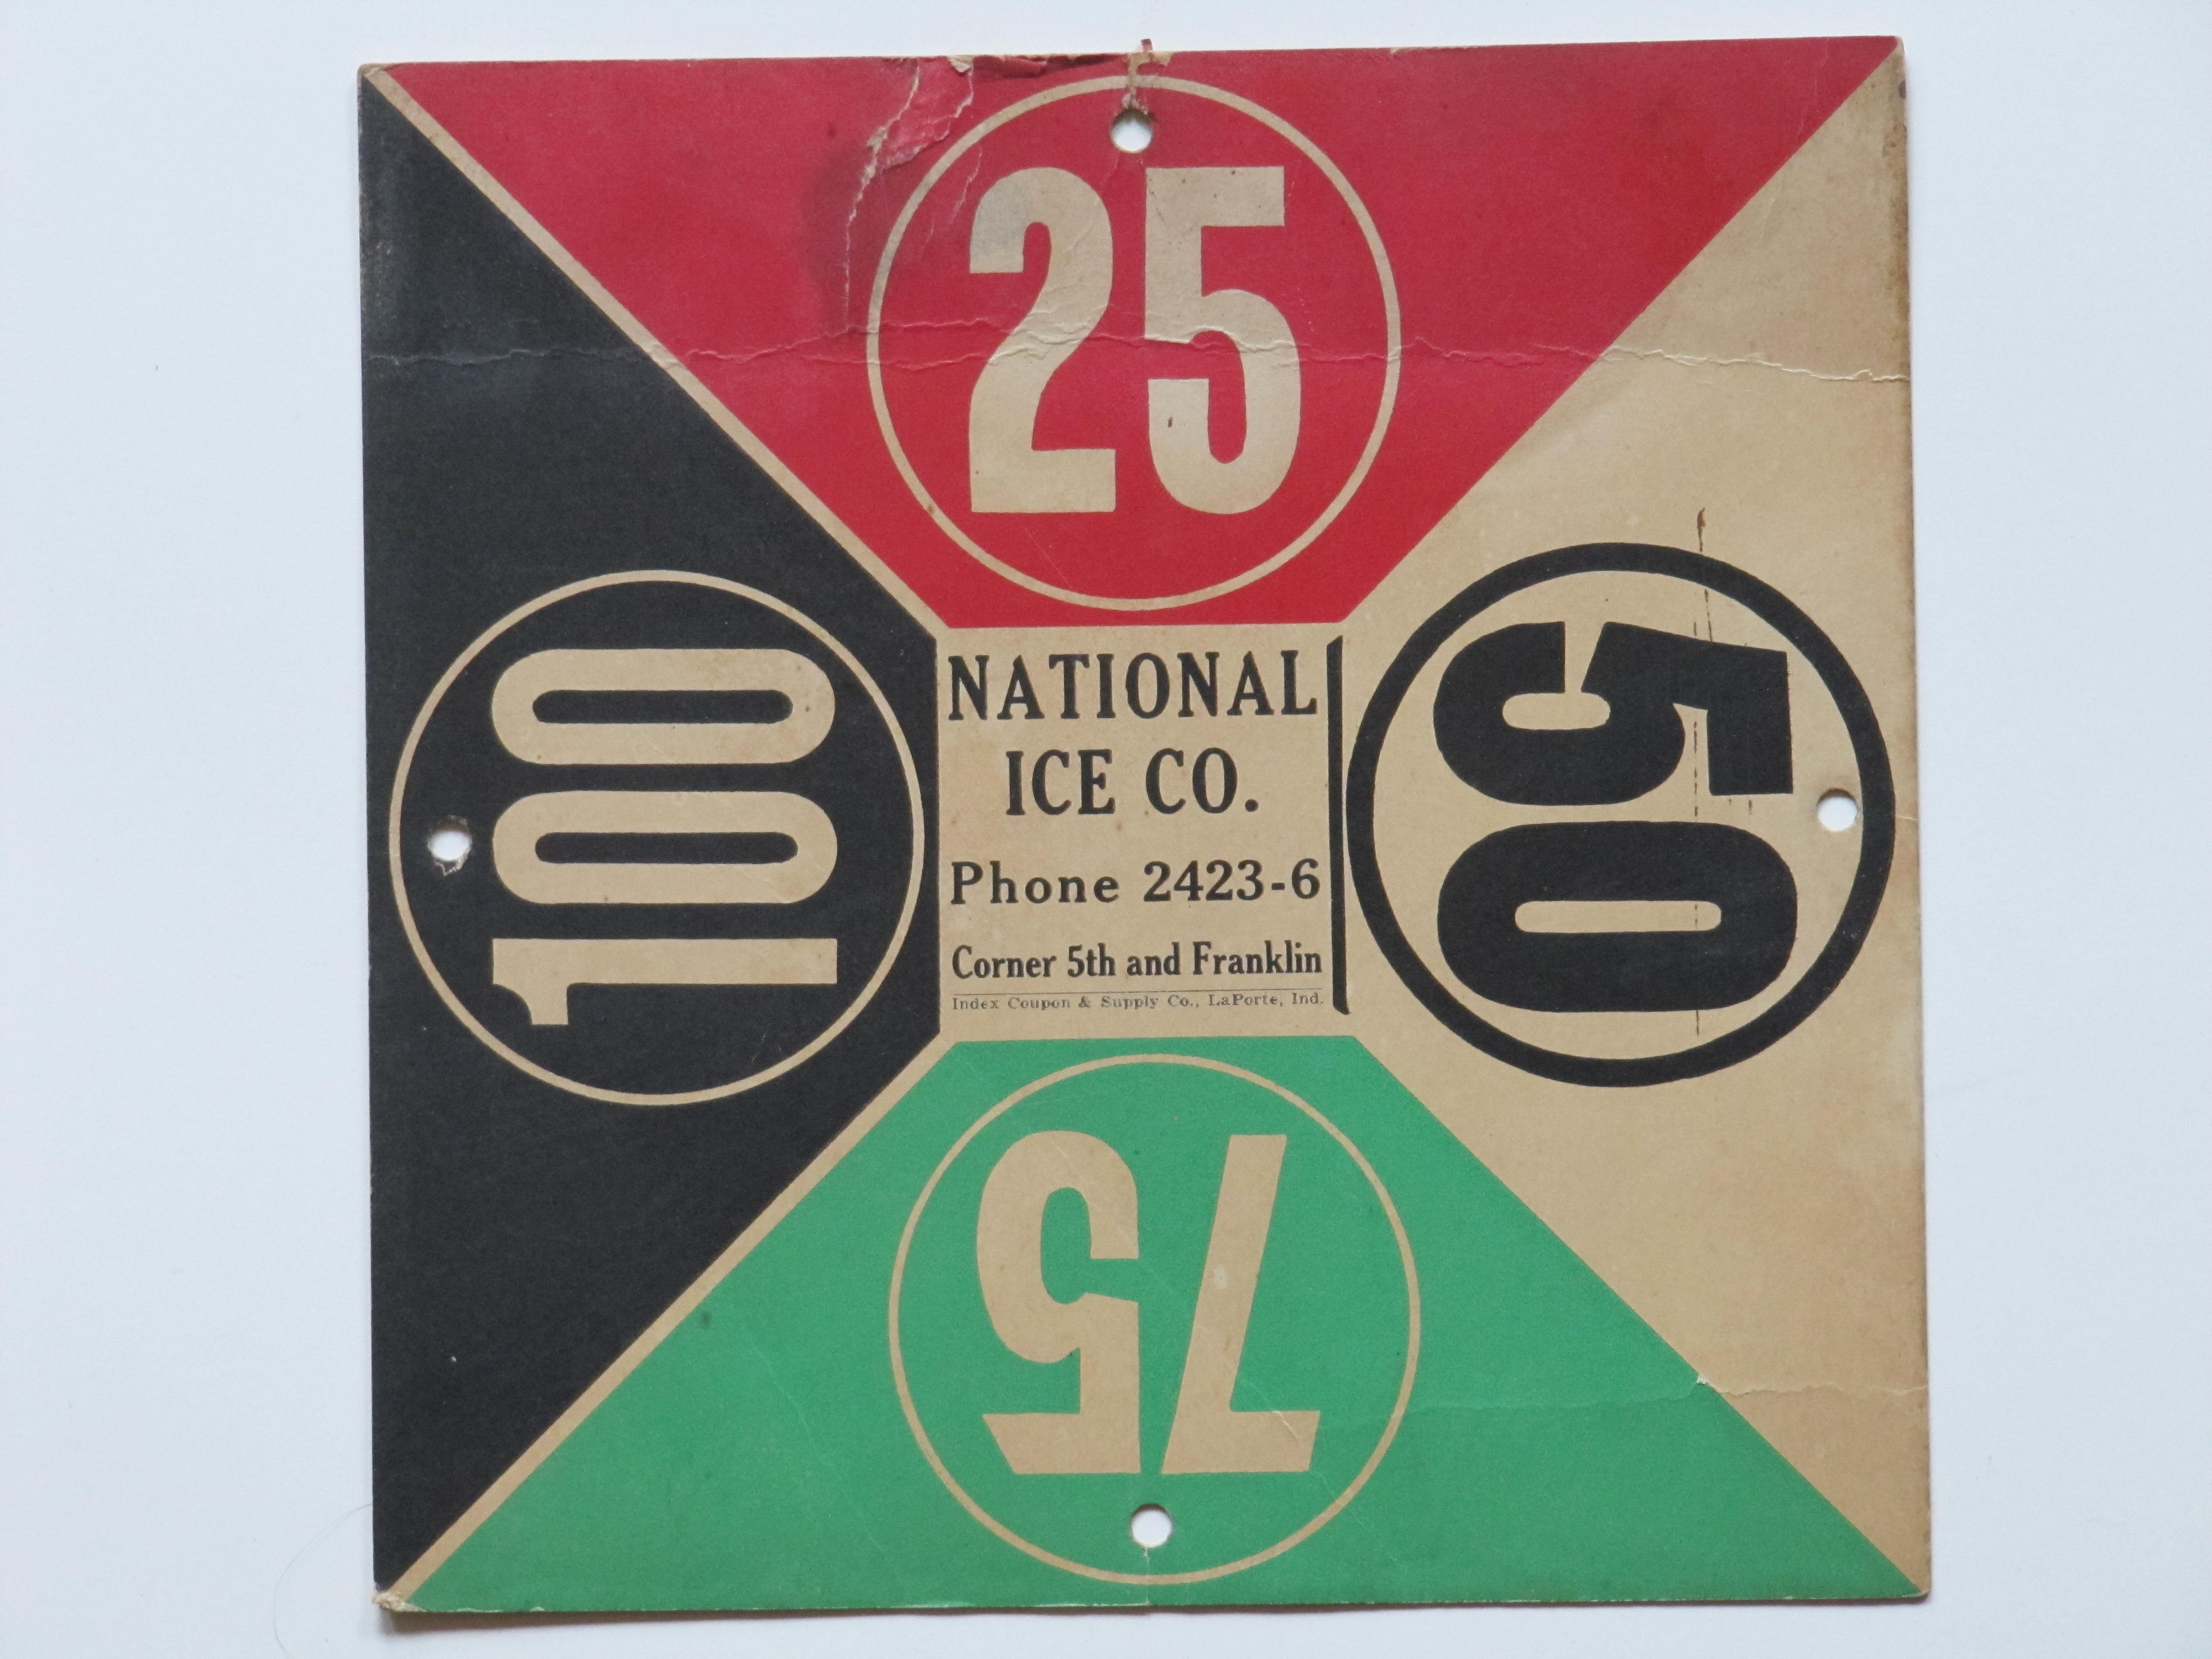 National Ice Co.